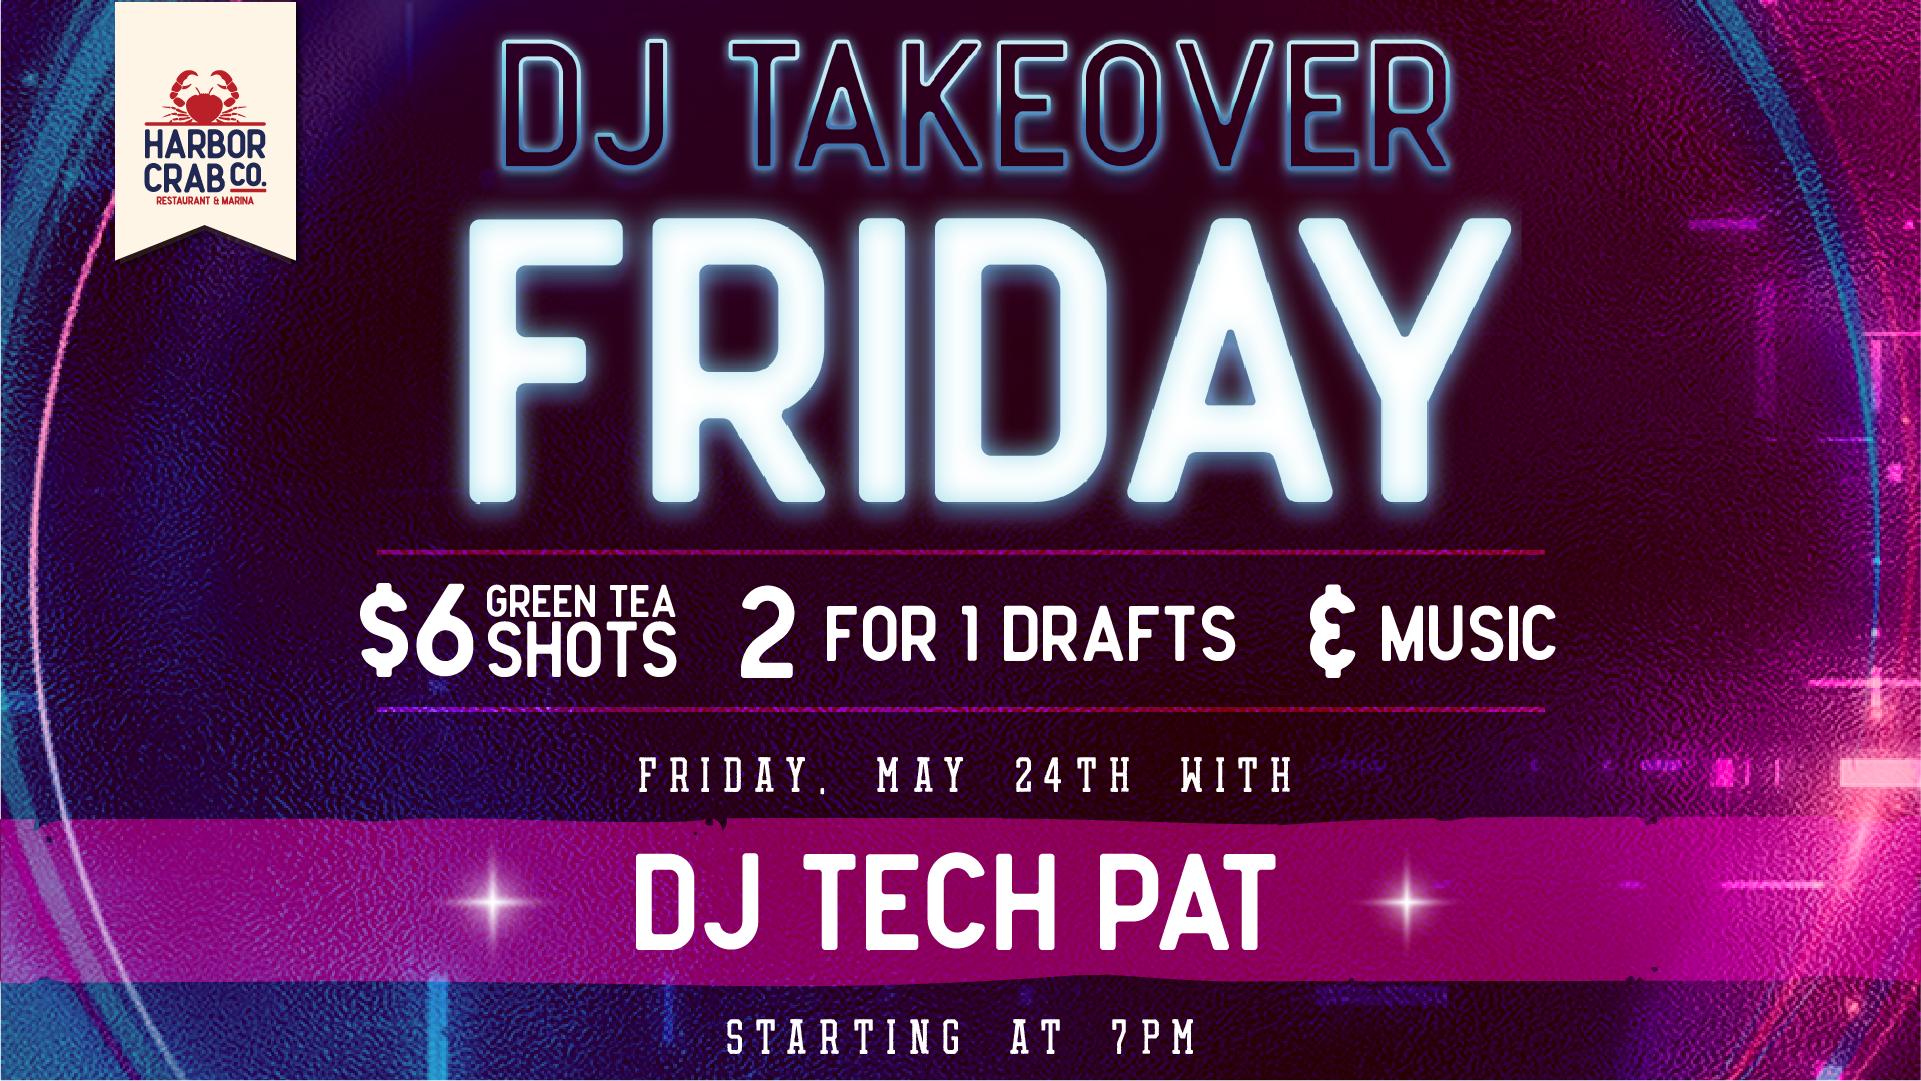 DJ Takeover with DJ Tech Pat at Harbor Crab on May 24th, from 7 pm. Evening of music, $6 green tea shots, and 2-for-1 drafts.